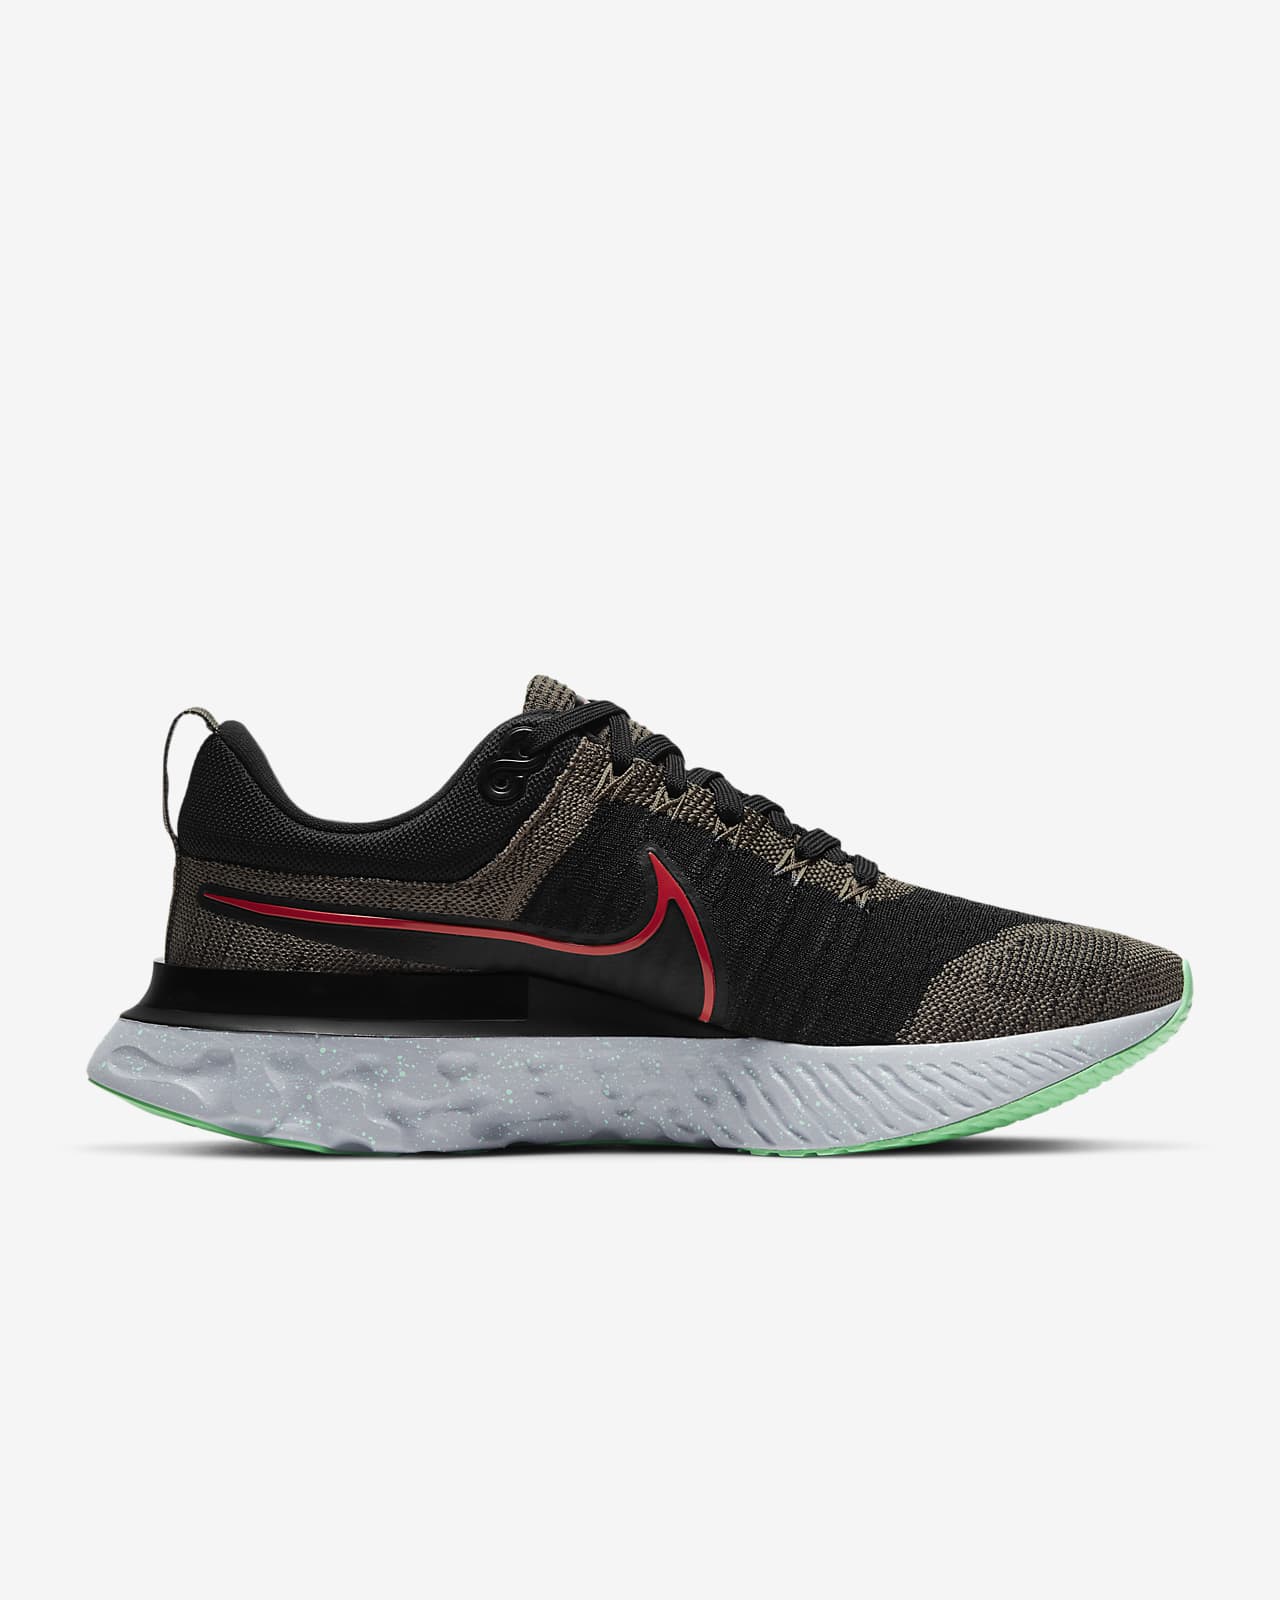 is nike react good for running